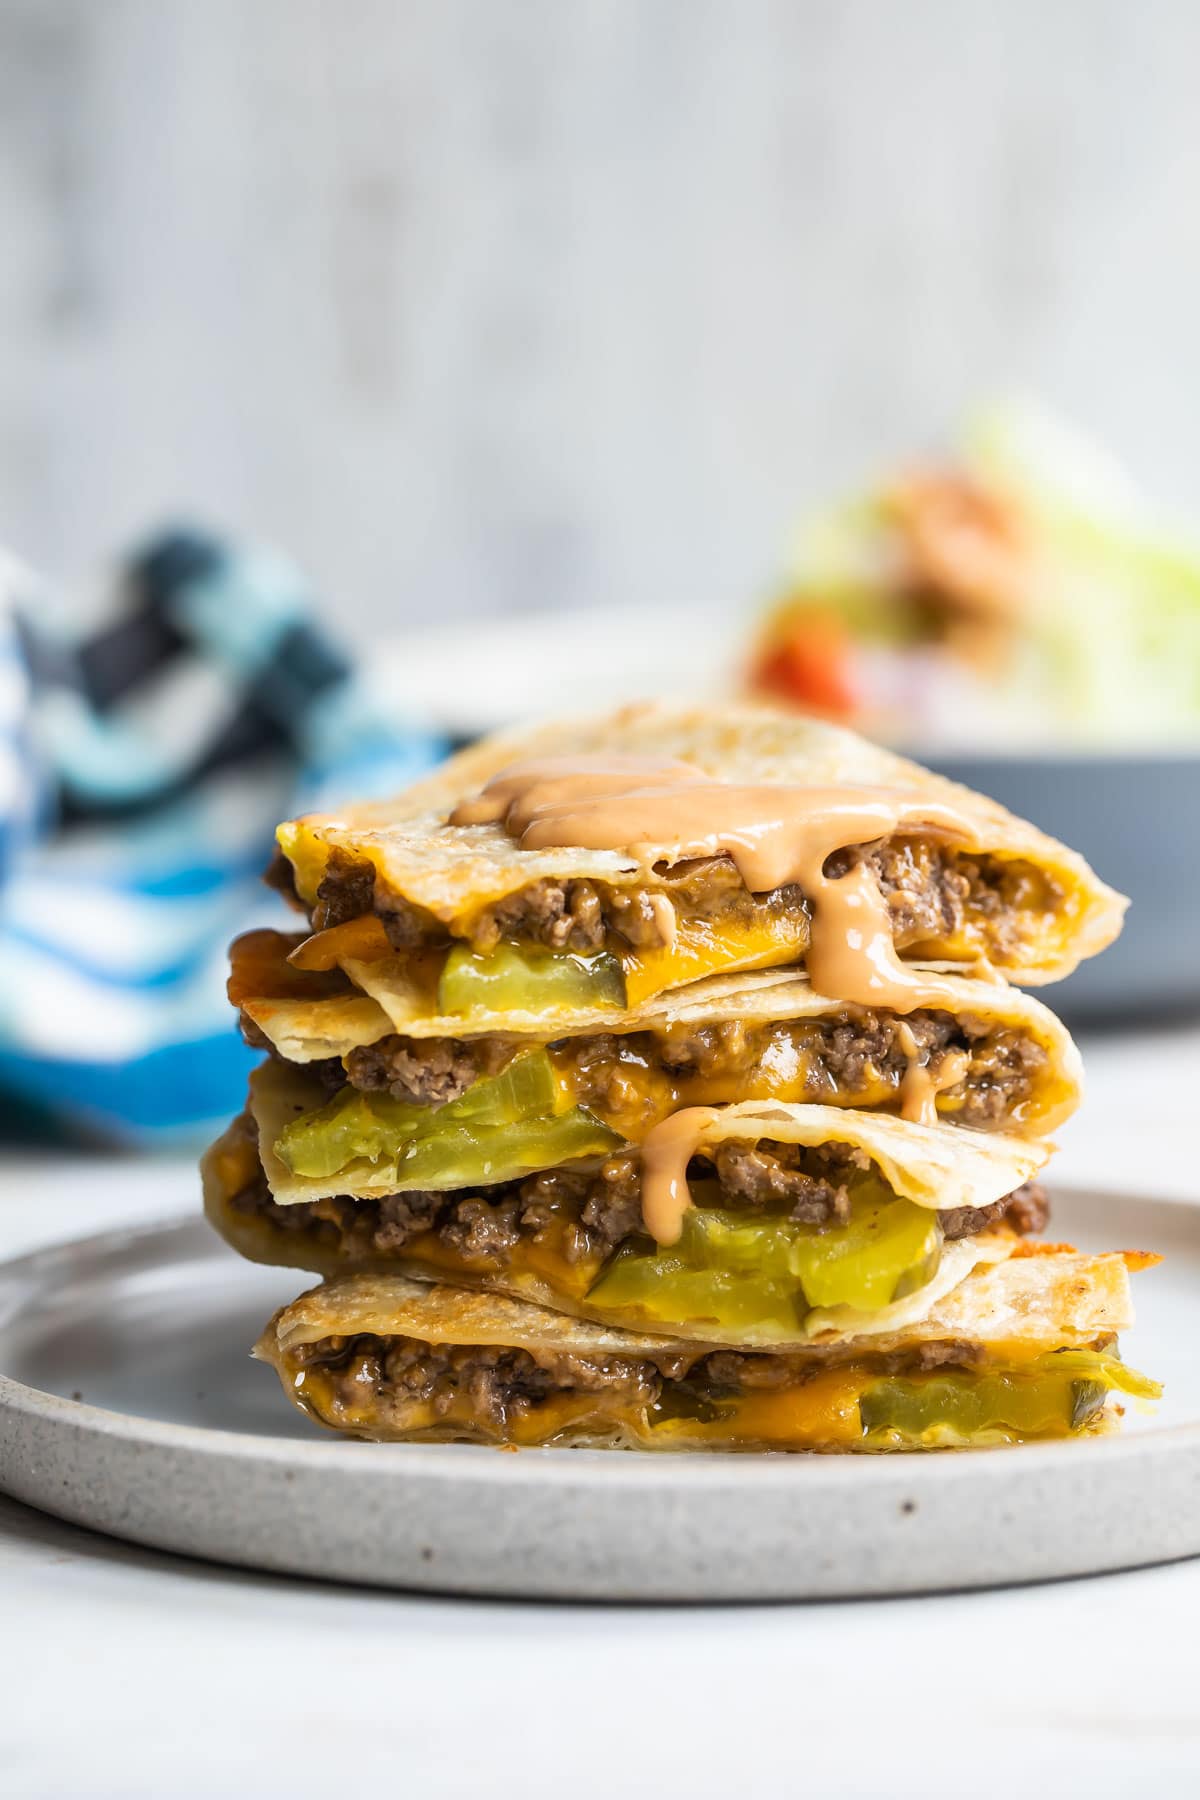 A cheeseburger quesadilla stacked on a plate with a wedge salad in the background.